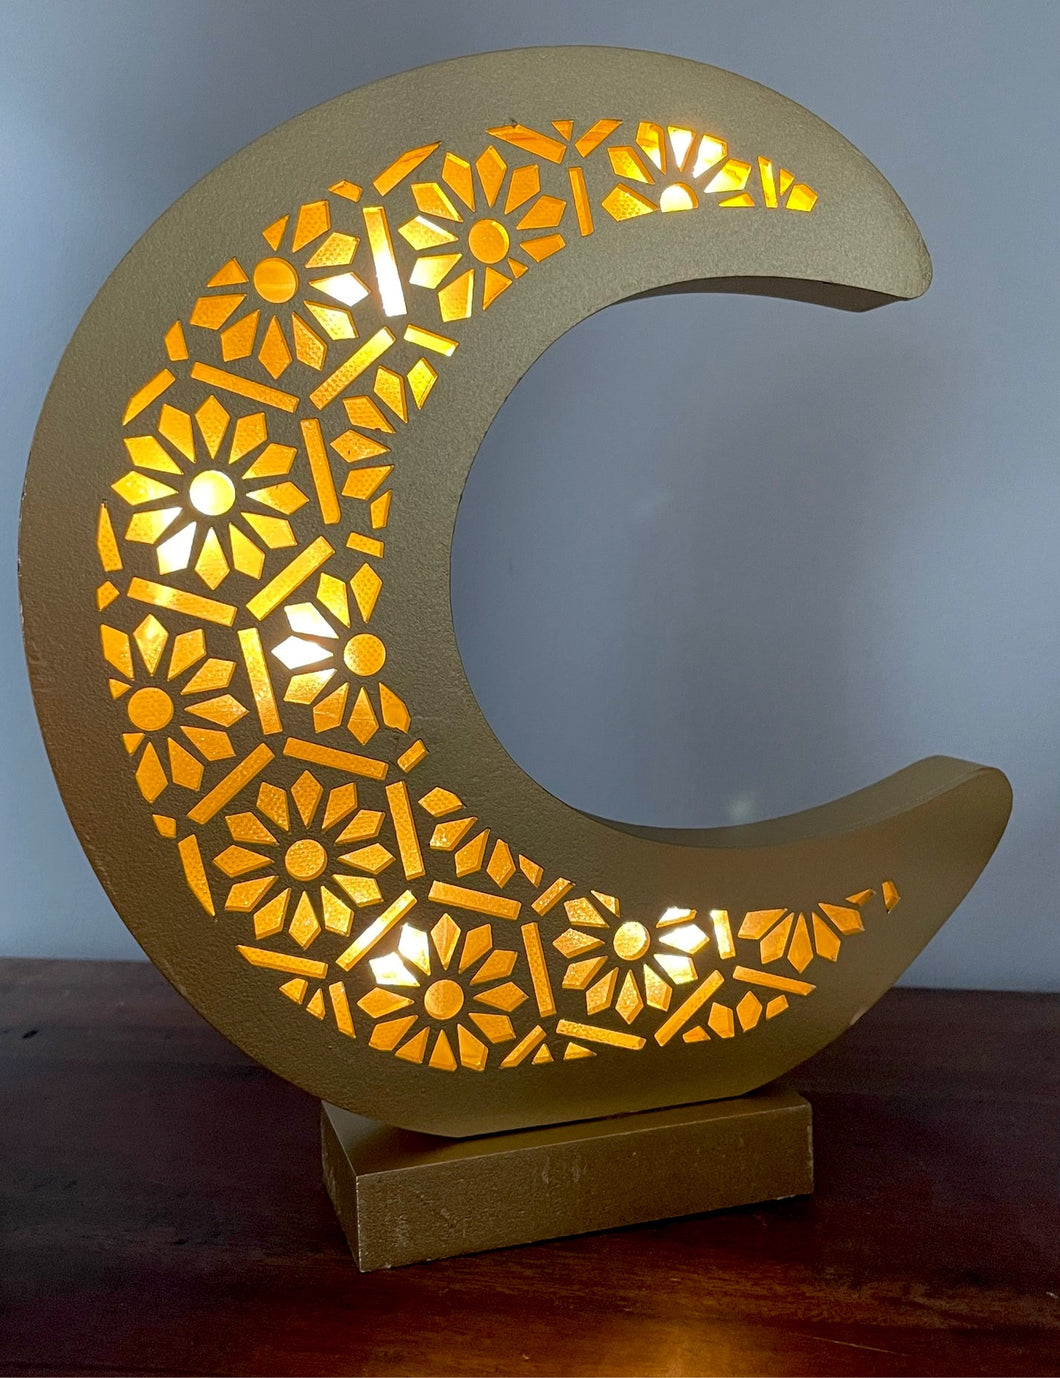 Crescent Moon LED Light (battery operated)